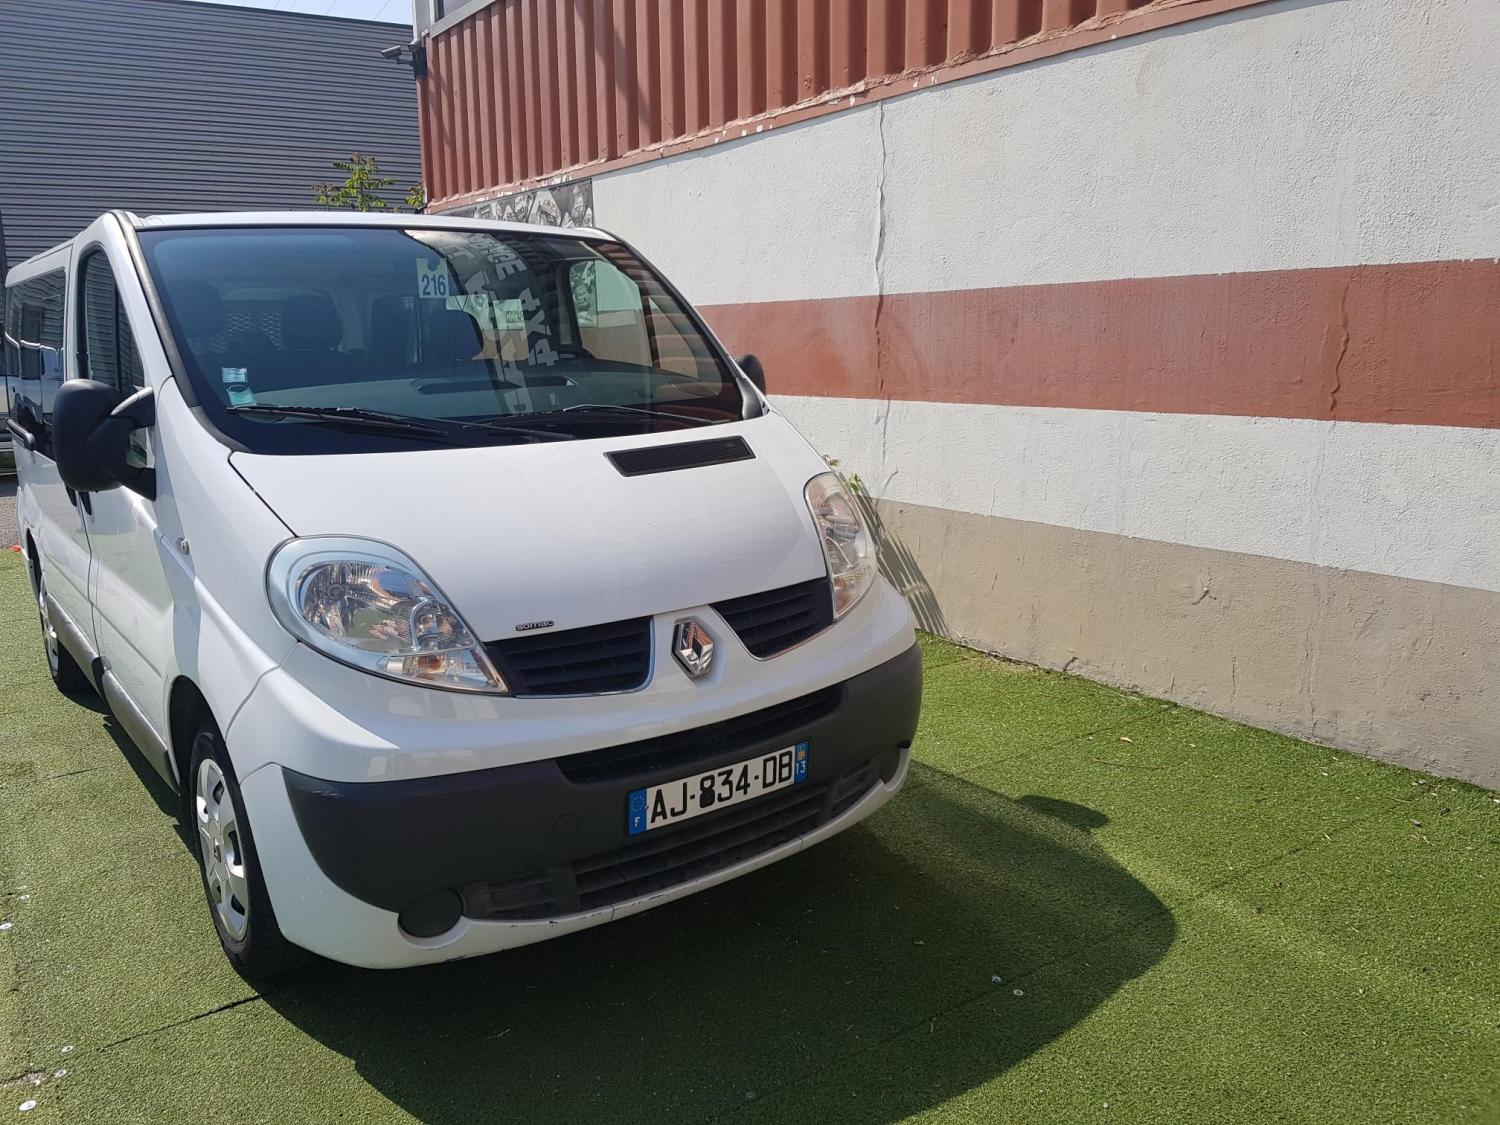 OCCASION RENAULT TRAFIC II TPMR 2.0L DCI 90CV 6 PLACES CG Renault VO846 :  GARAGE ALL ROAD VILLAGE SPECIALISTE 4X4 A AUBAGNE